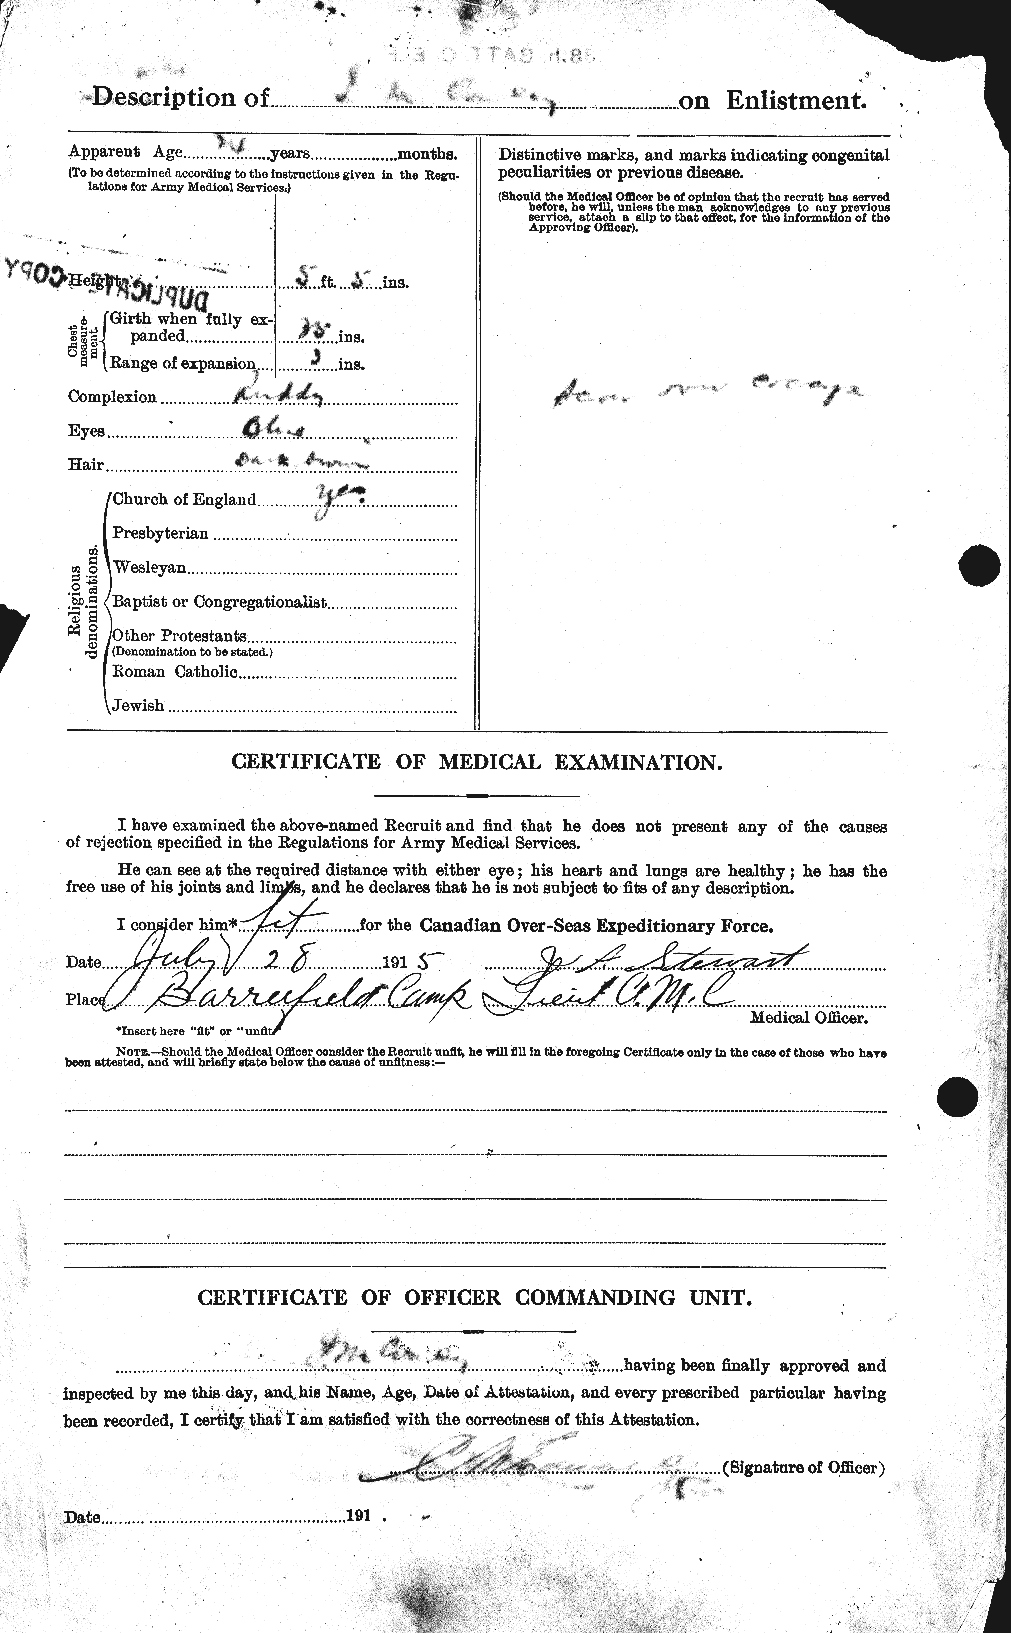 Personnel Records of the First World War - CEF 067828b